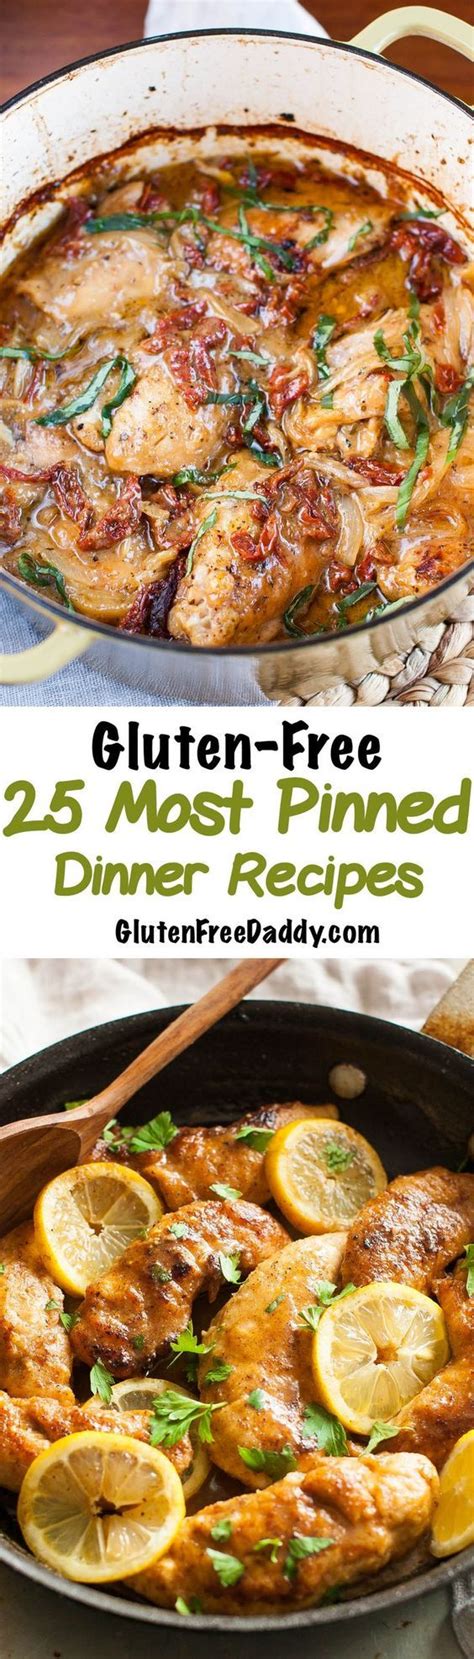 These recipes are colorful and satisfying, from. Best Gluten-Free Dinner Recipes Index (With images ...